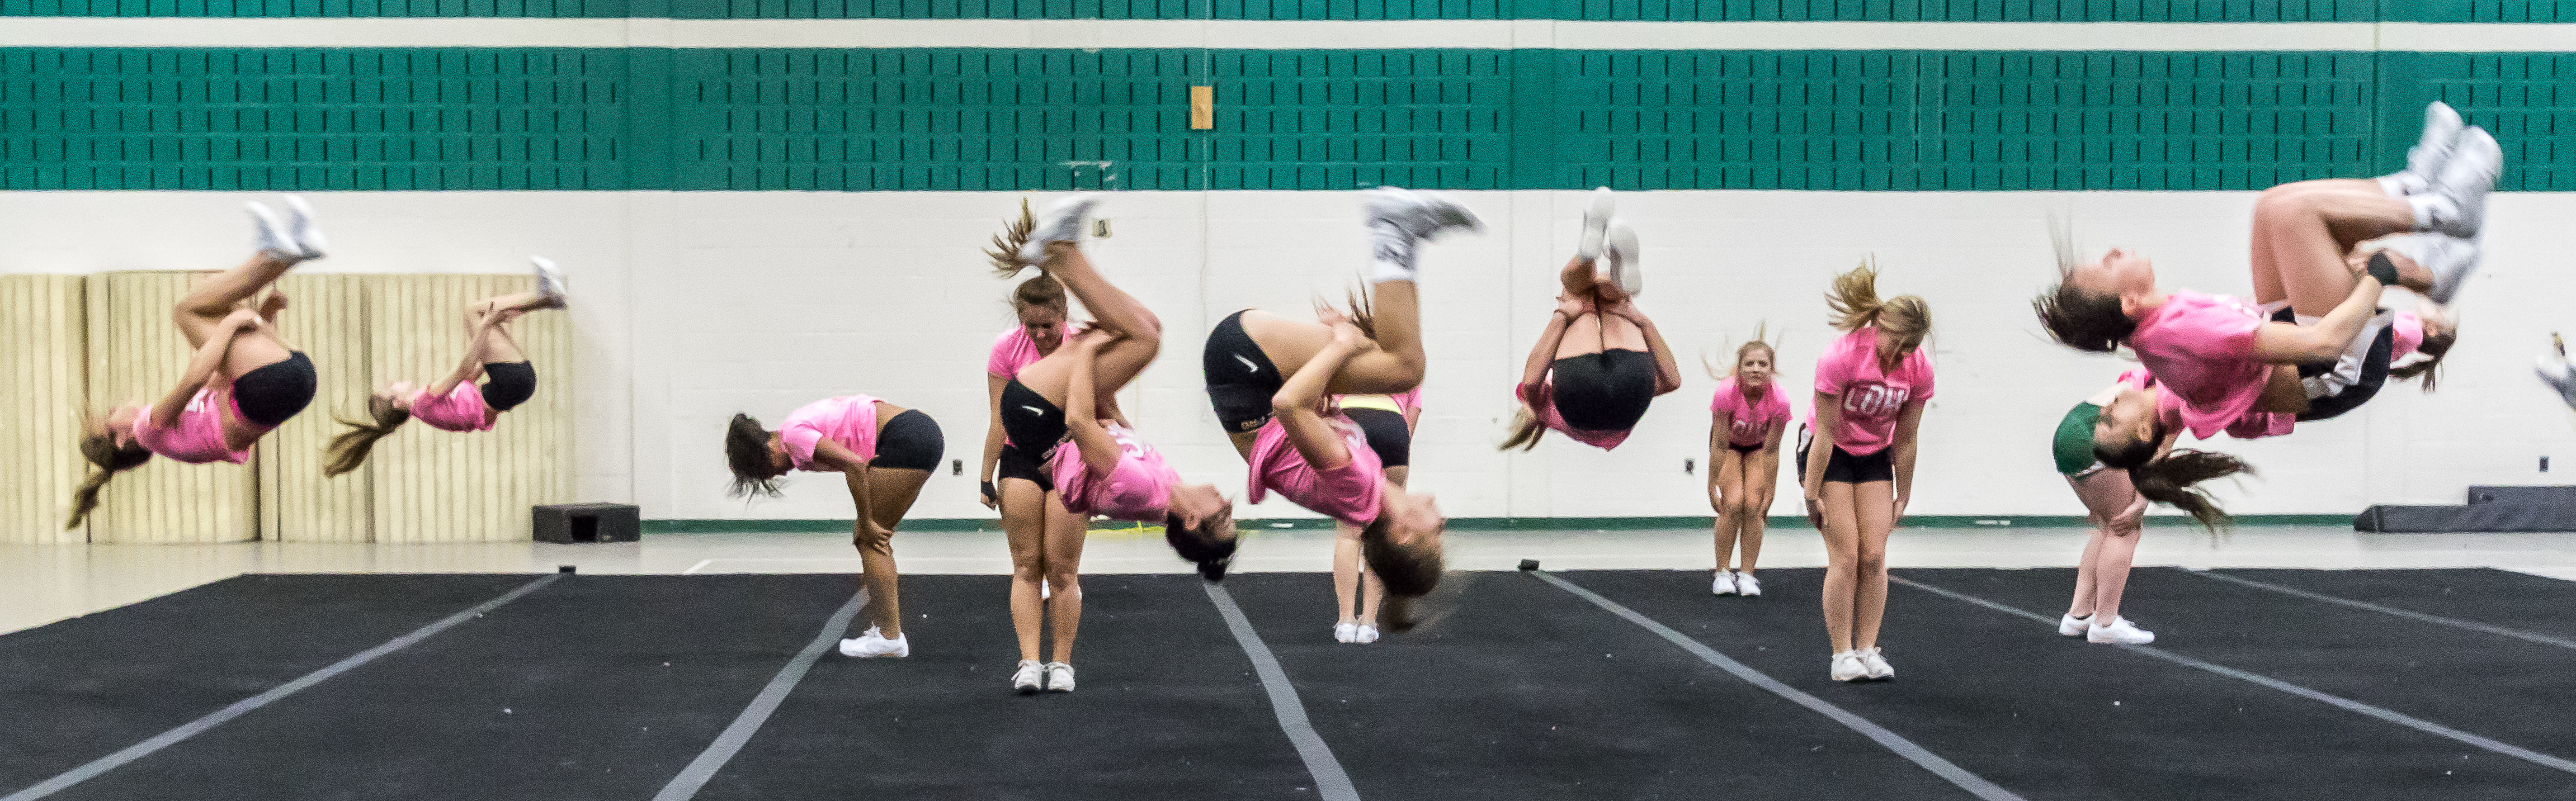 Competitive Cheer fliping